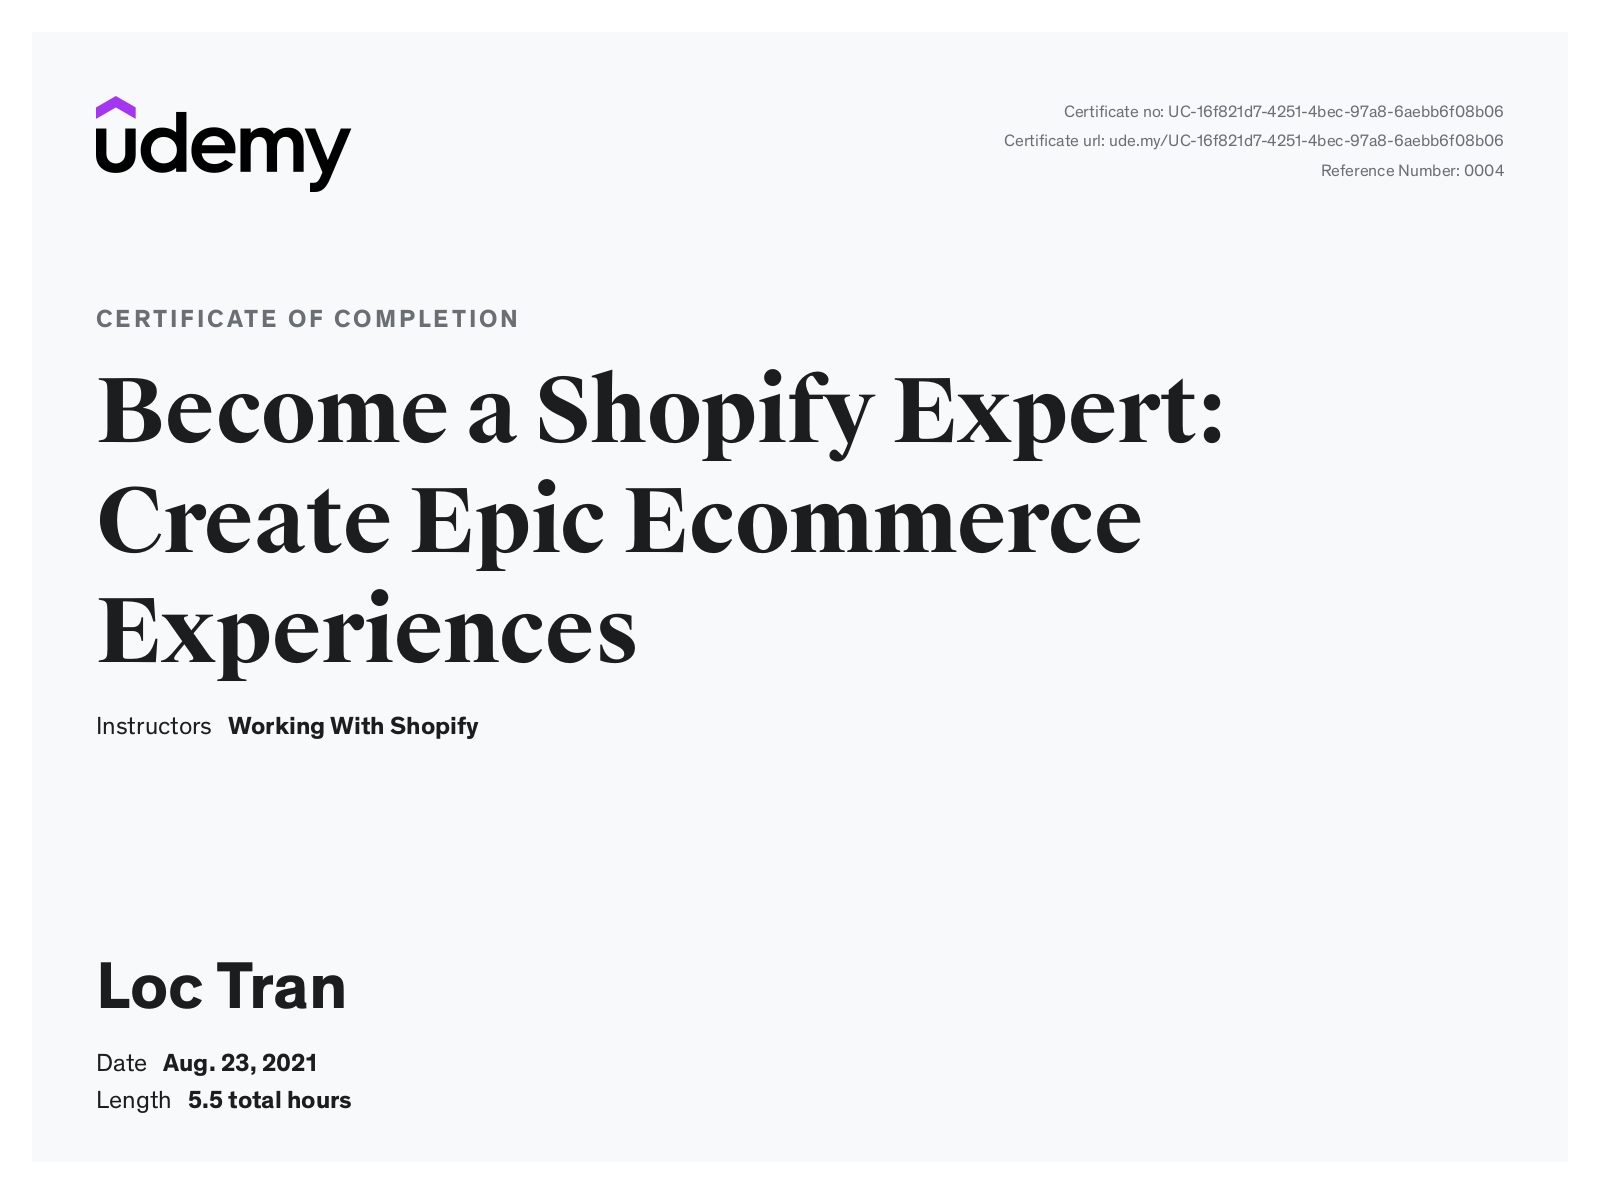 Become a Shopify Expert: Create Epic Ecommerce Experiences